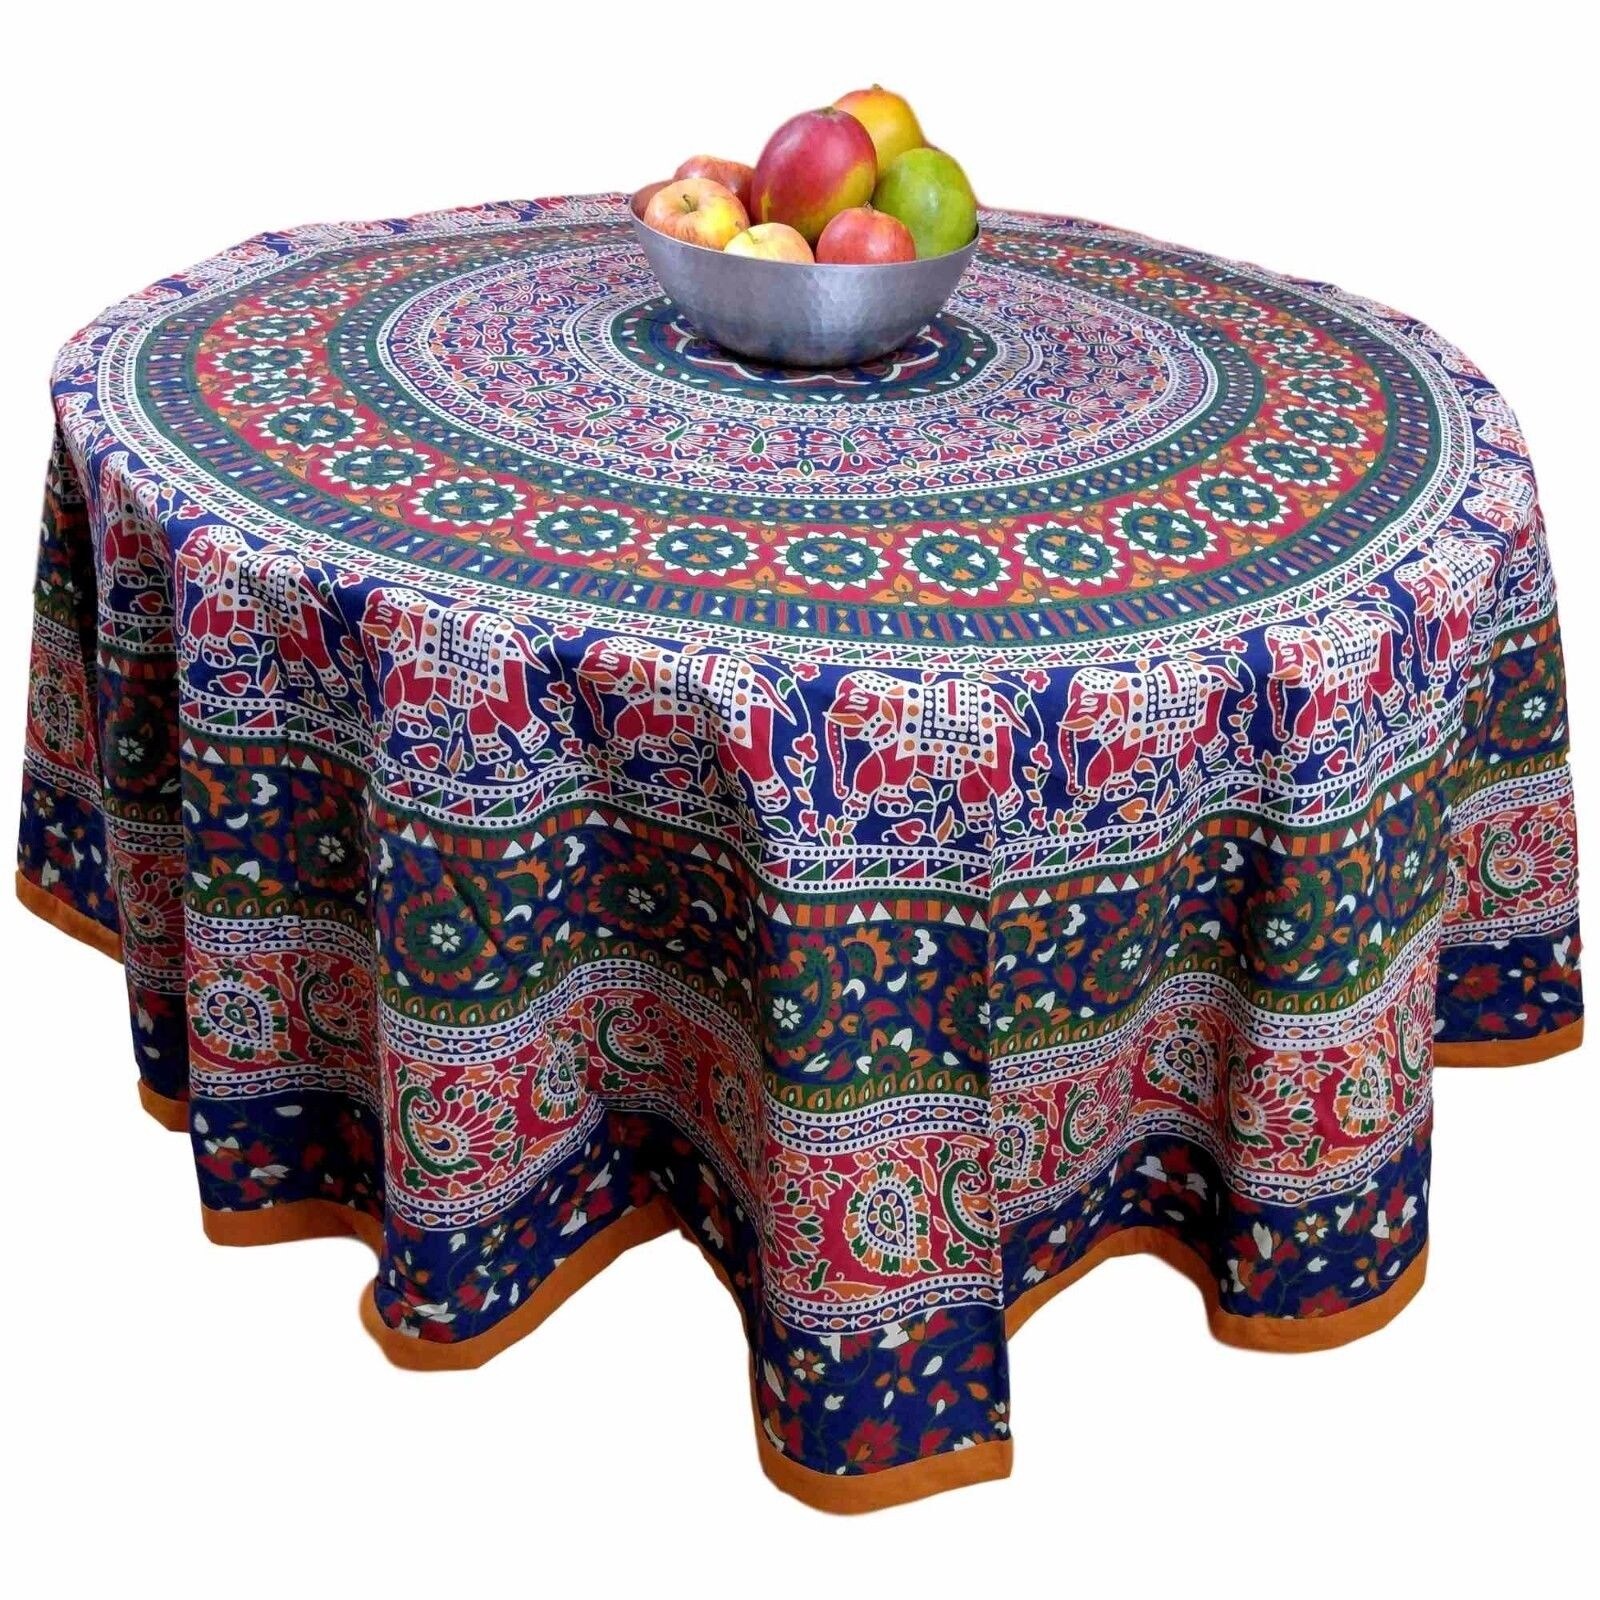 Cotton Elephant Mandala Floral Tablecloth Round 81 in Red Blue Orange ...